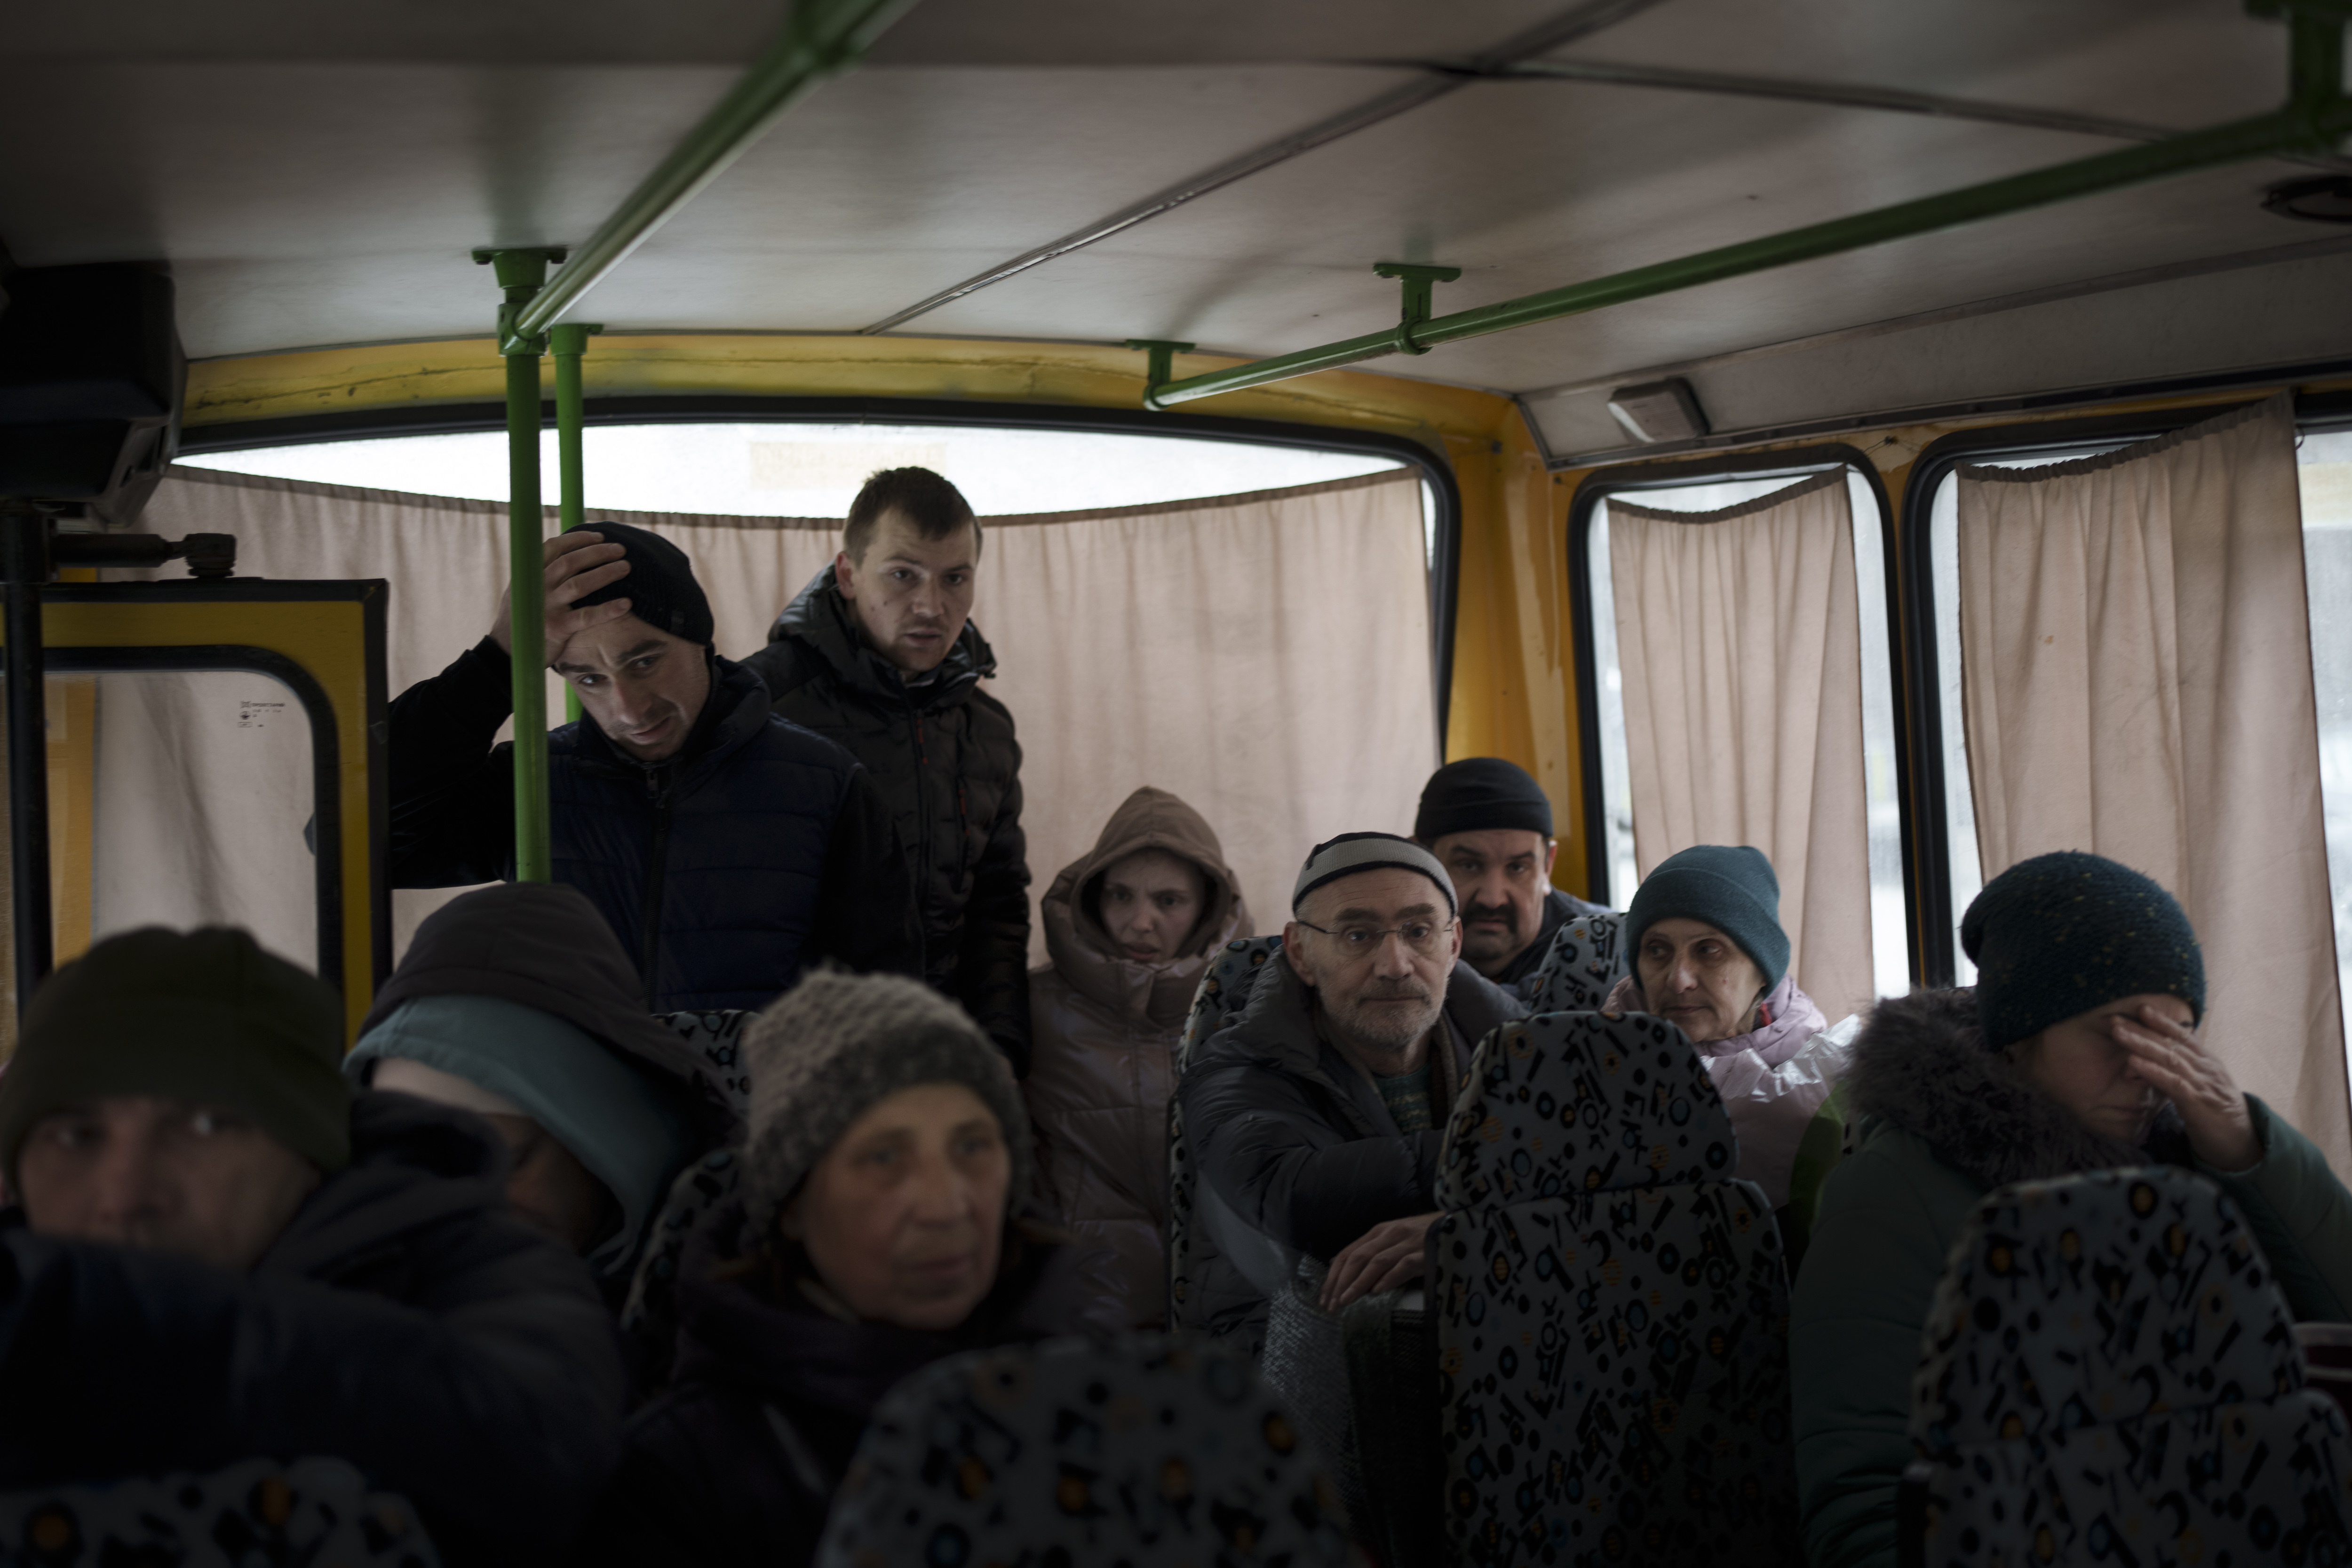 Ukrainians enter a bus as they are evacuated from Irpin, Ukraine, on March 9.